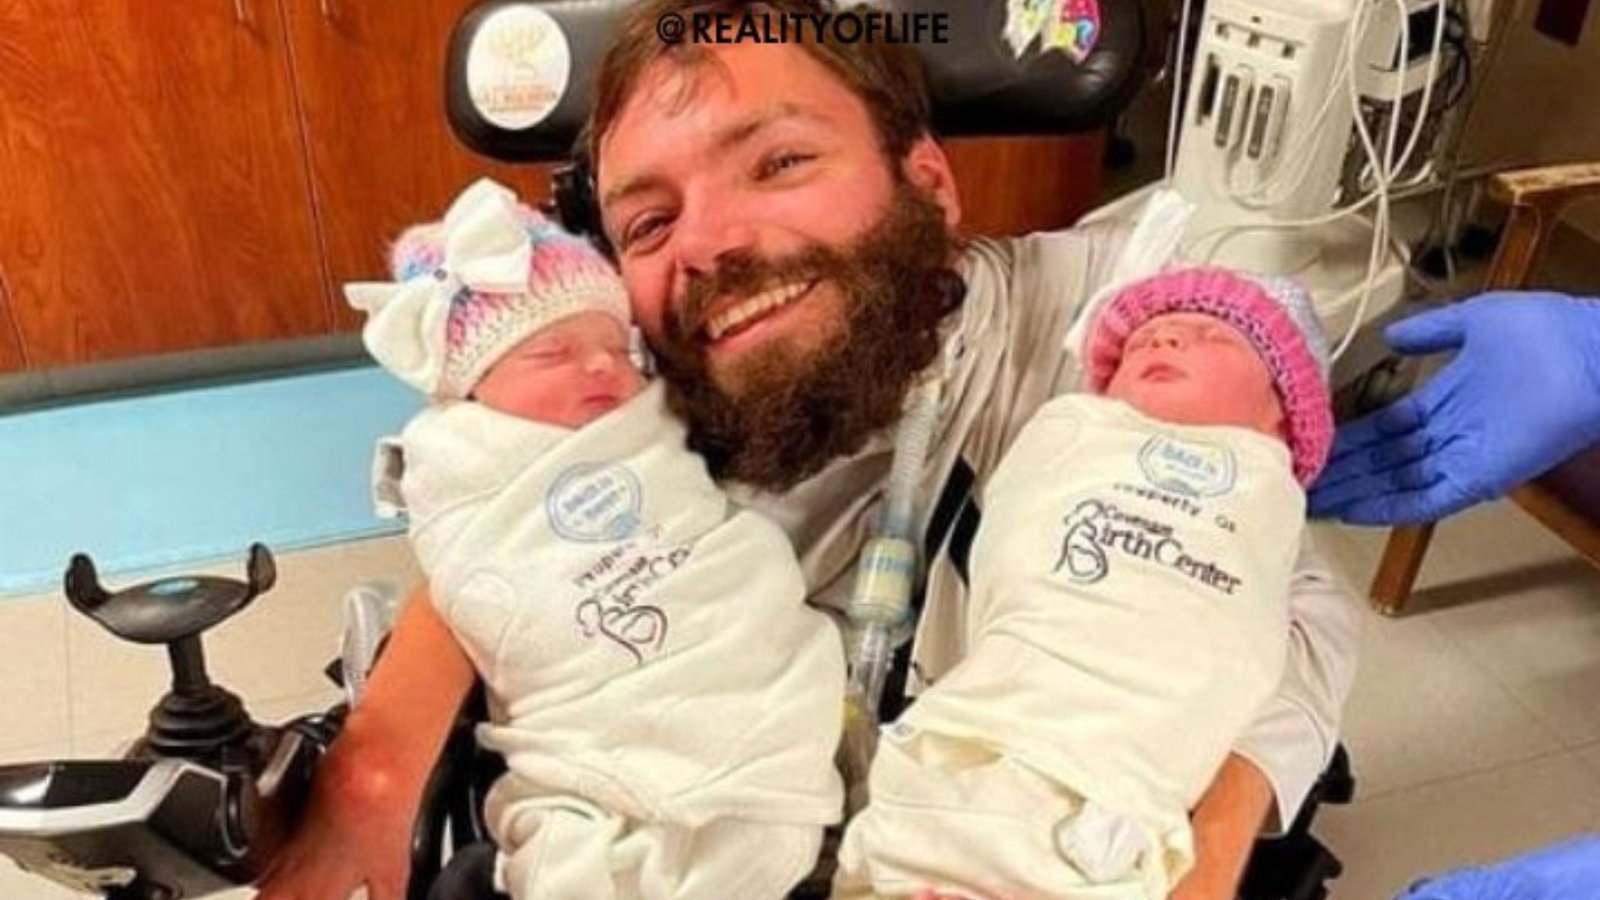 Man expected to die at 2 is now dad of adorable twins, fires back at trolls who attack his disability